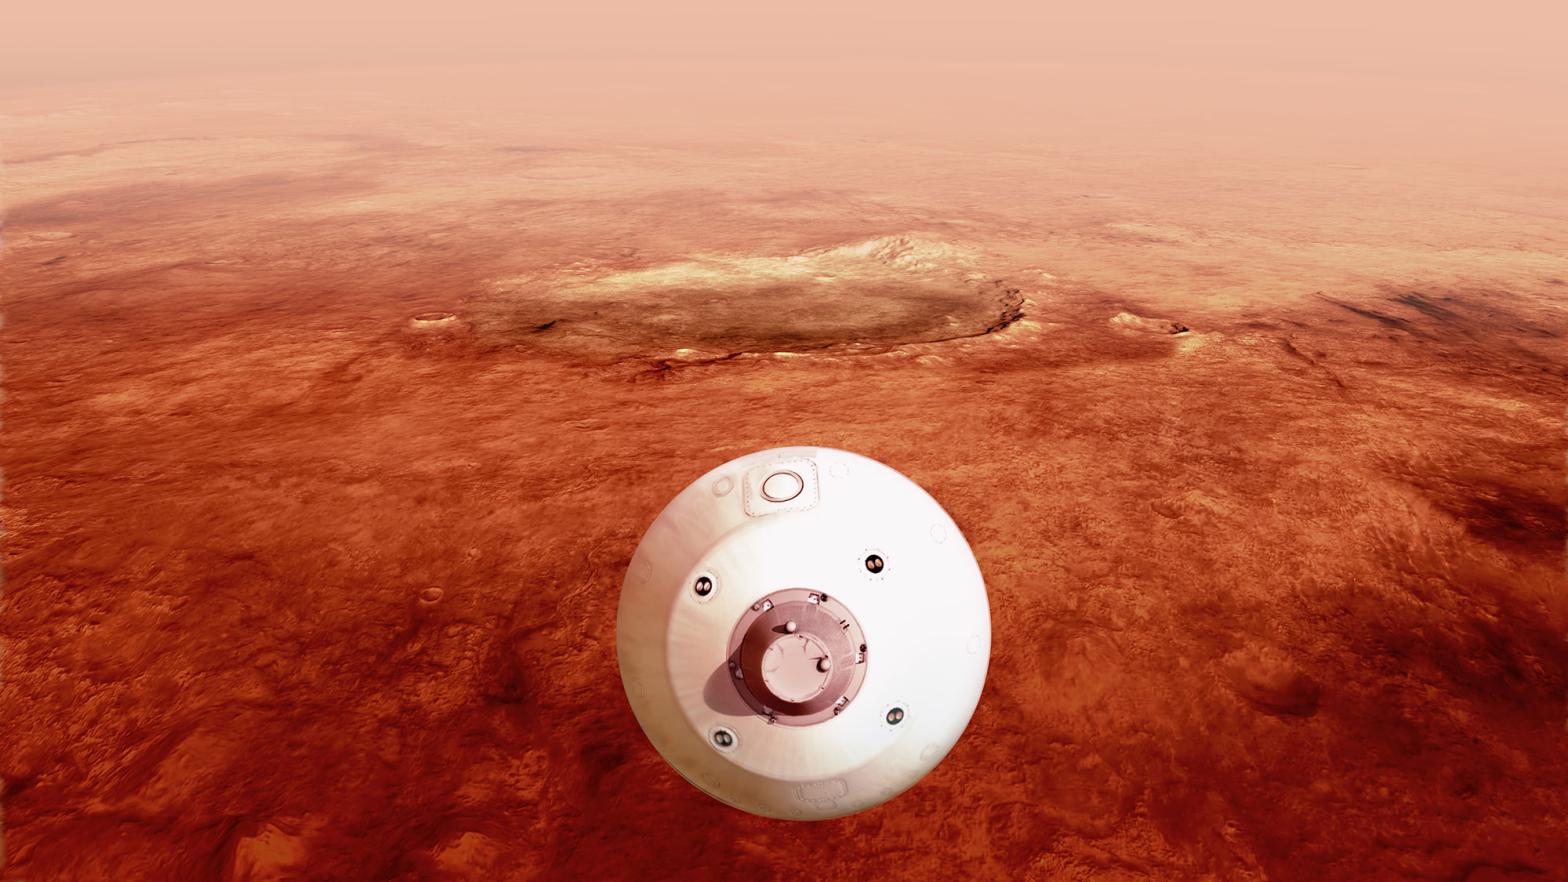 Depiction of the aeroshell containing the Perseverance rover.  (Image: NASA/JPL-Caltech)